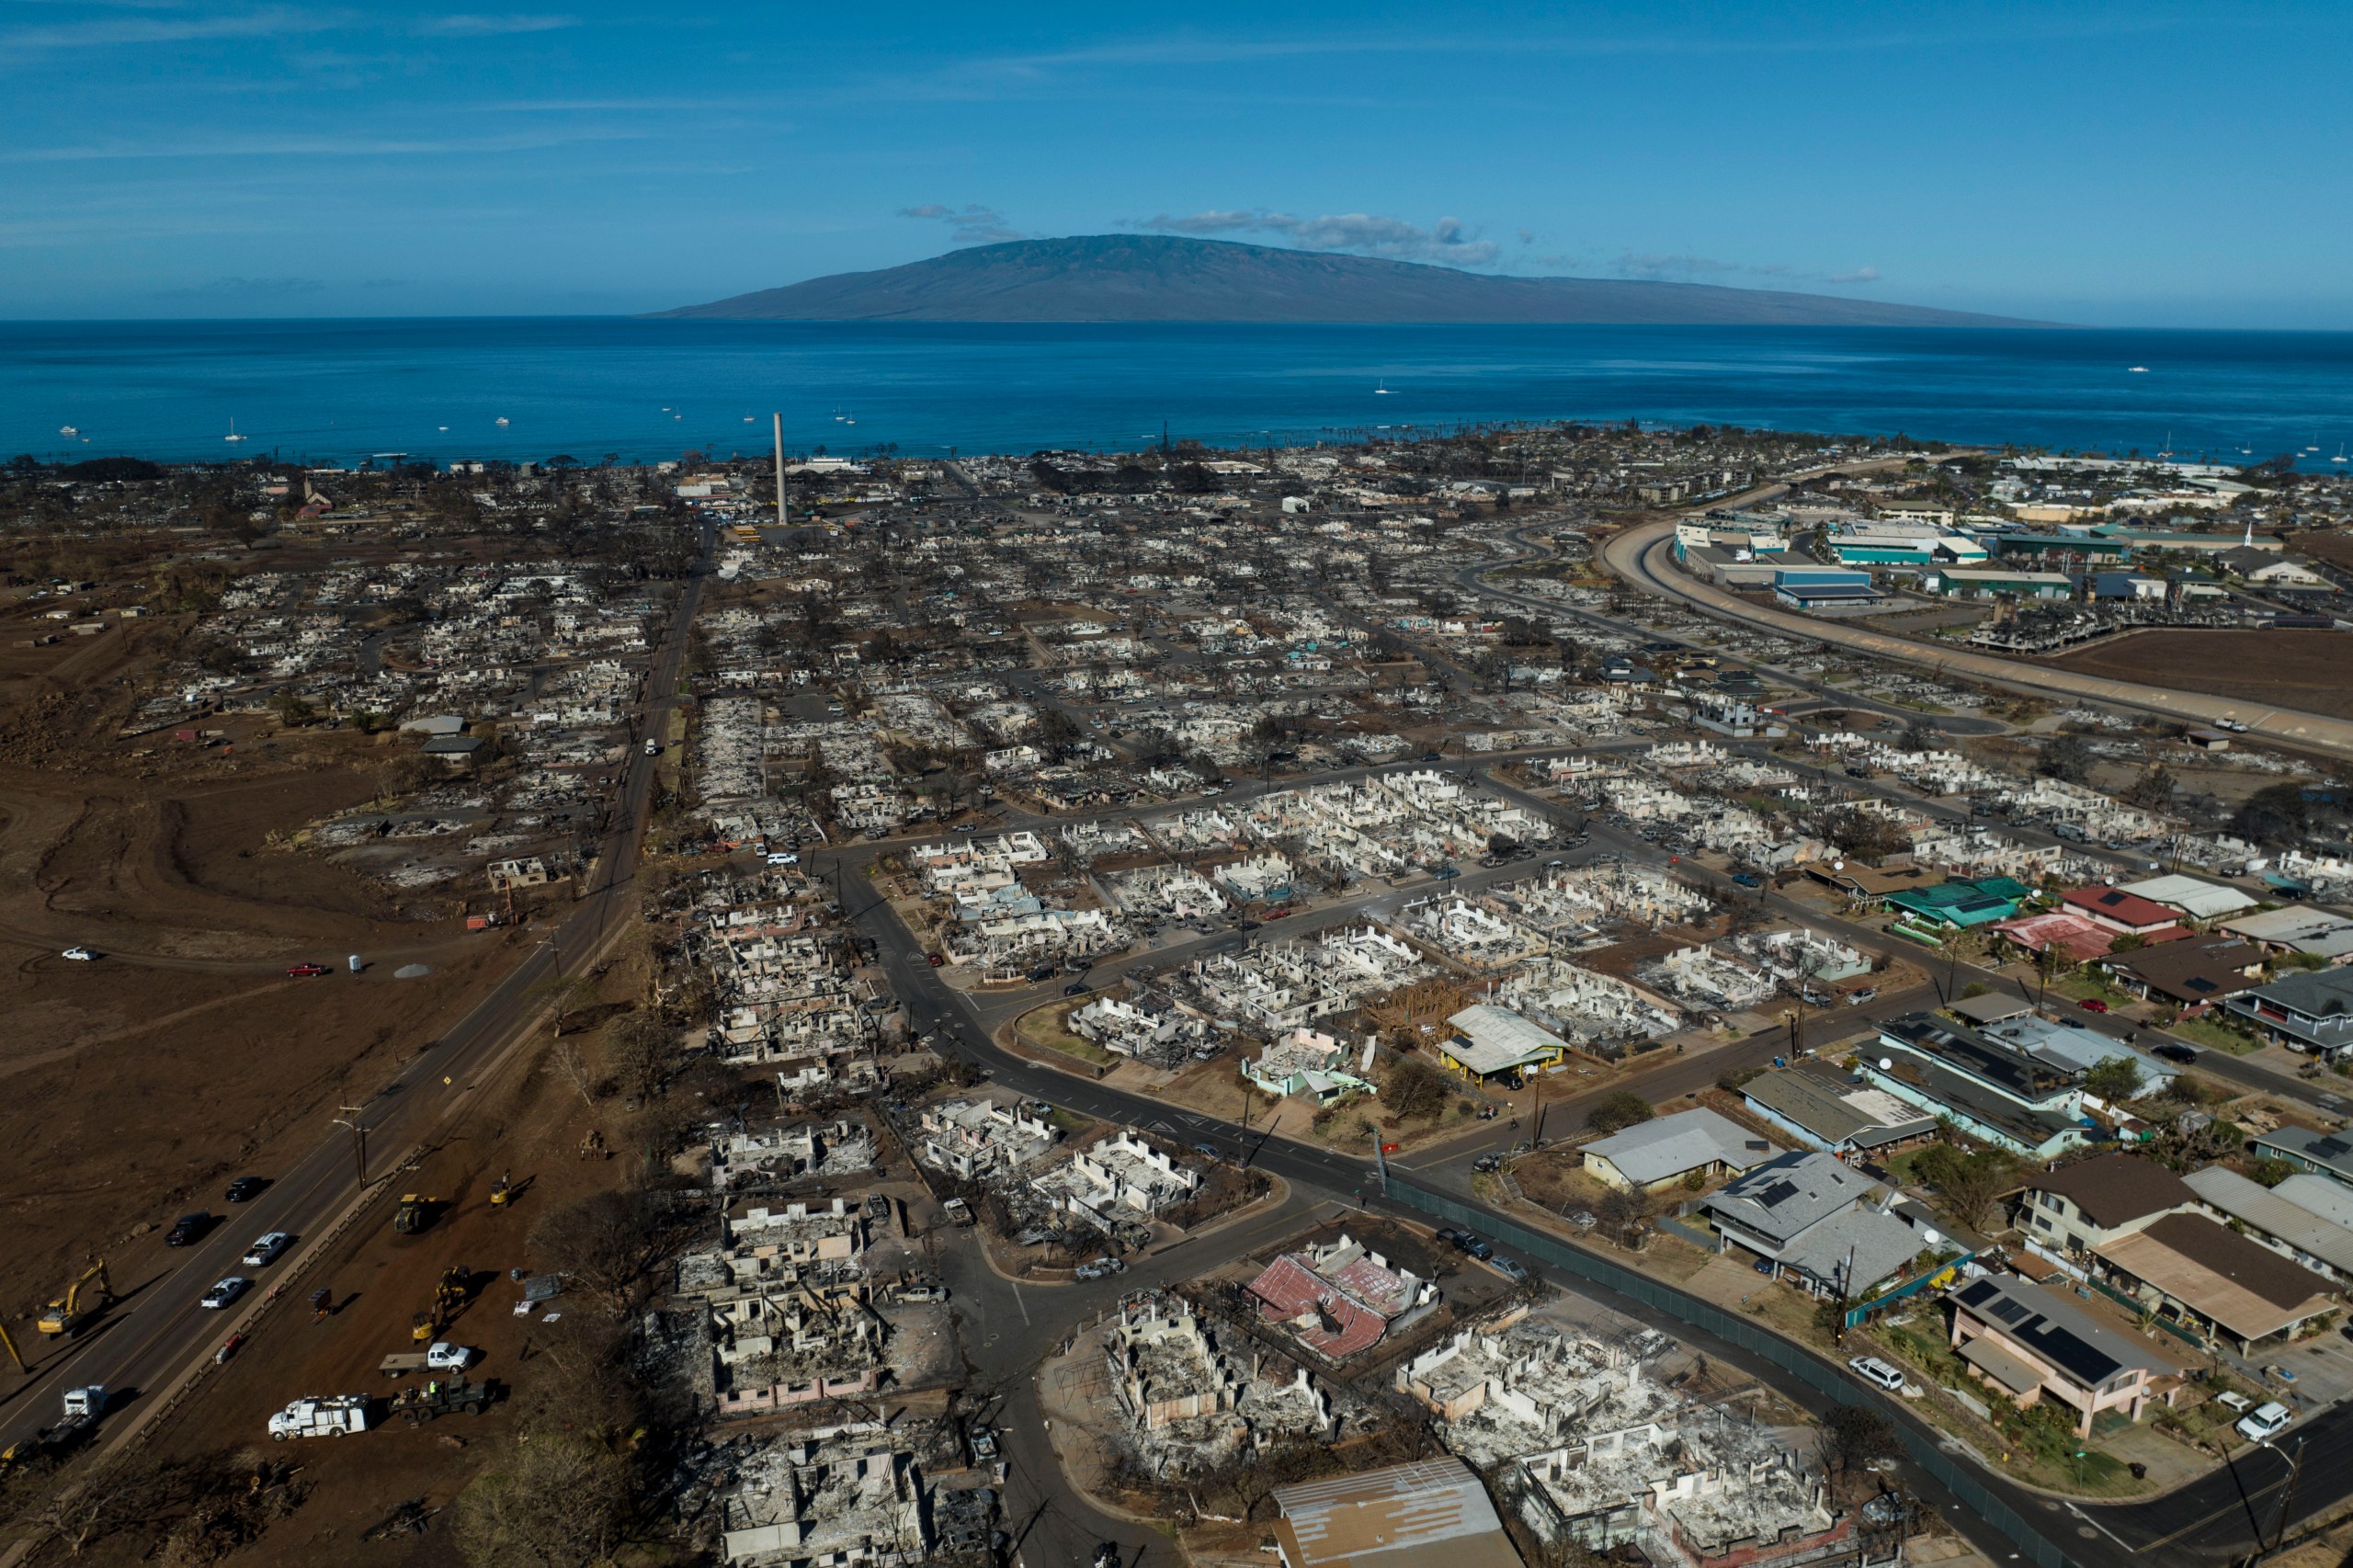 FILE - A general view shows the aftermath of a wildfire in Lahaina, Hawaii, Thursday, Aug. 17, 2023. A University of Hawaii study examining the health effects of last year's deadly wildfires on Maui found that up to 74% of participants may have difficulty breathing and otherwise have poor respiratory health, and almost half showed signs of compromised lung function. (AP Photo/Jae C. Hong, File)